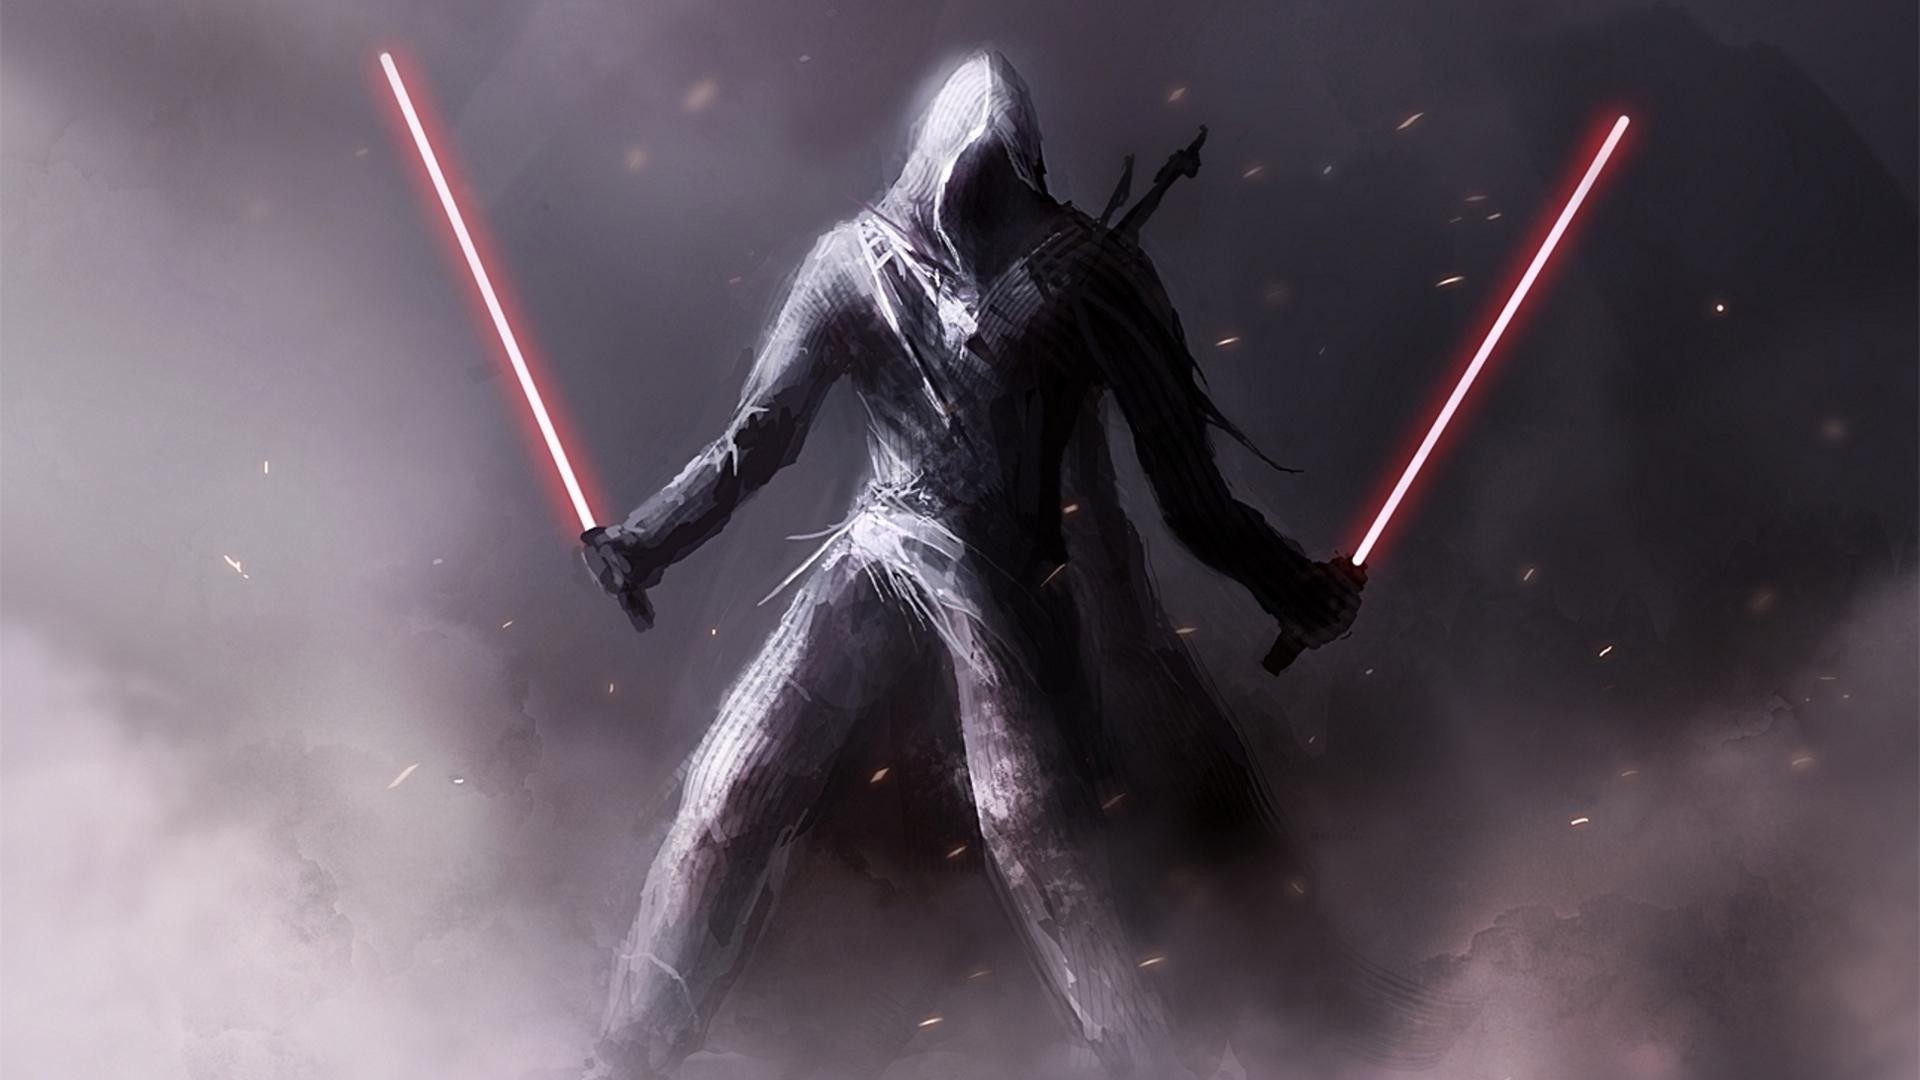 1920x1080 Star Wars Sith Wallpapers High Definition On Wallpaper Hd 1920 x 1080 px  623.08 KB battle